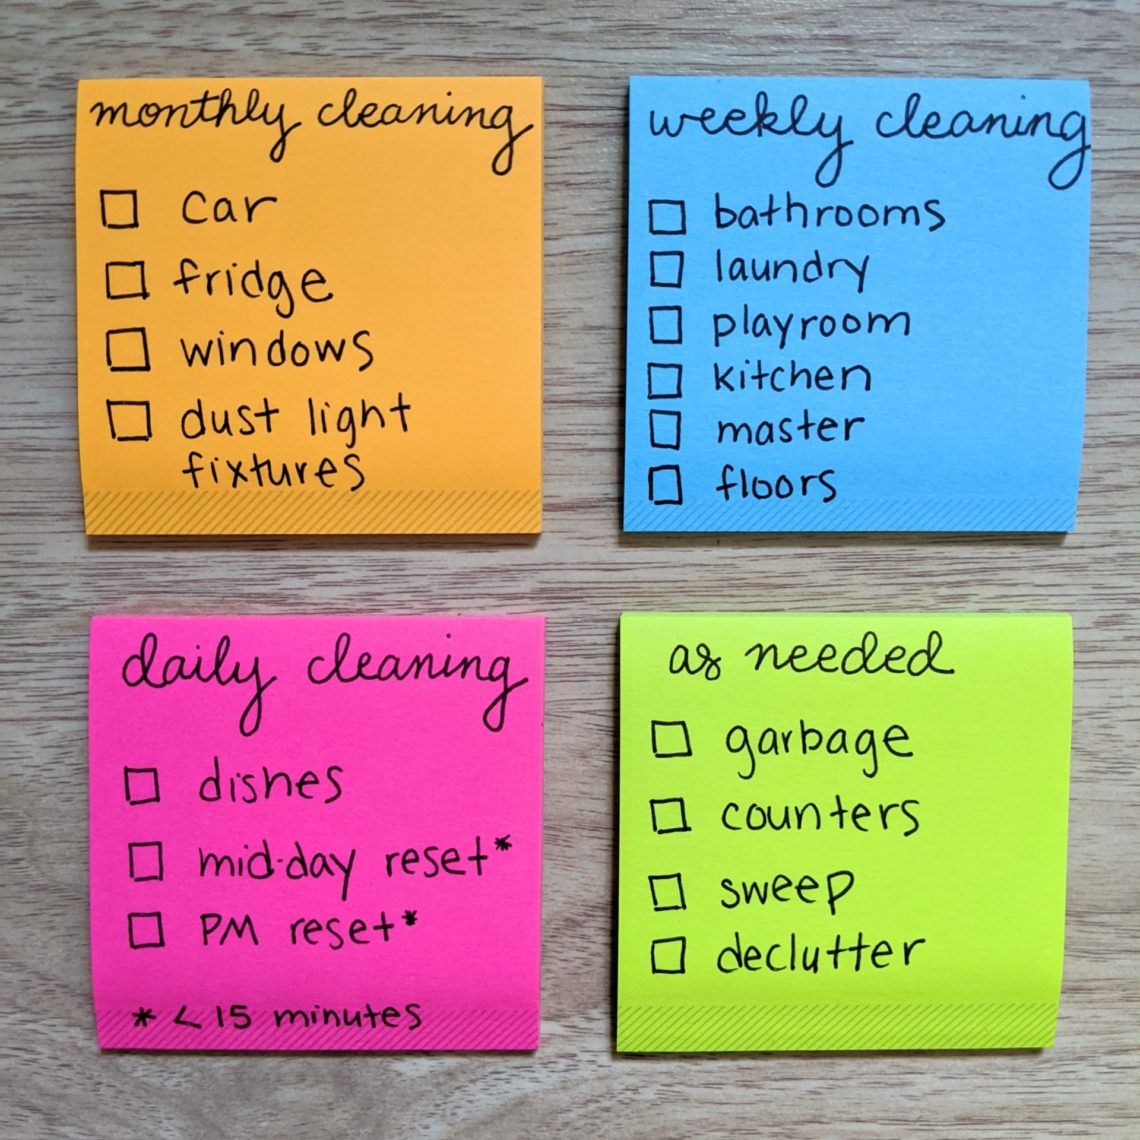 Home Cleaning Schedule